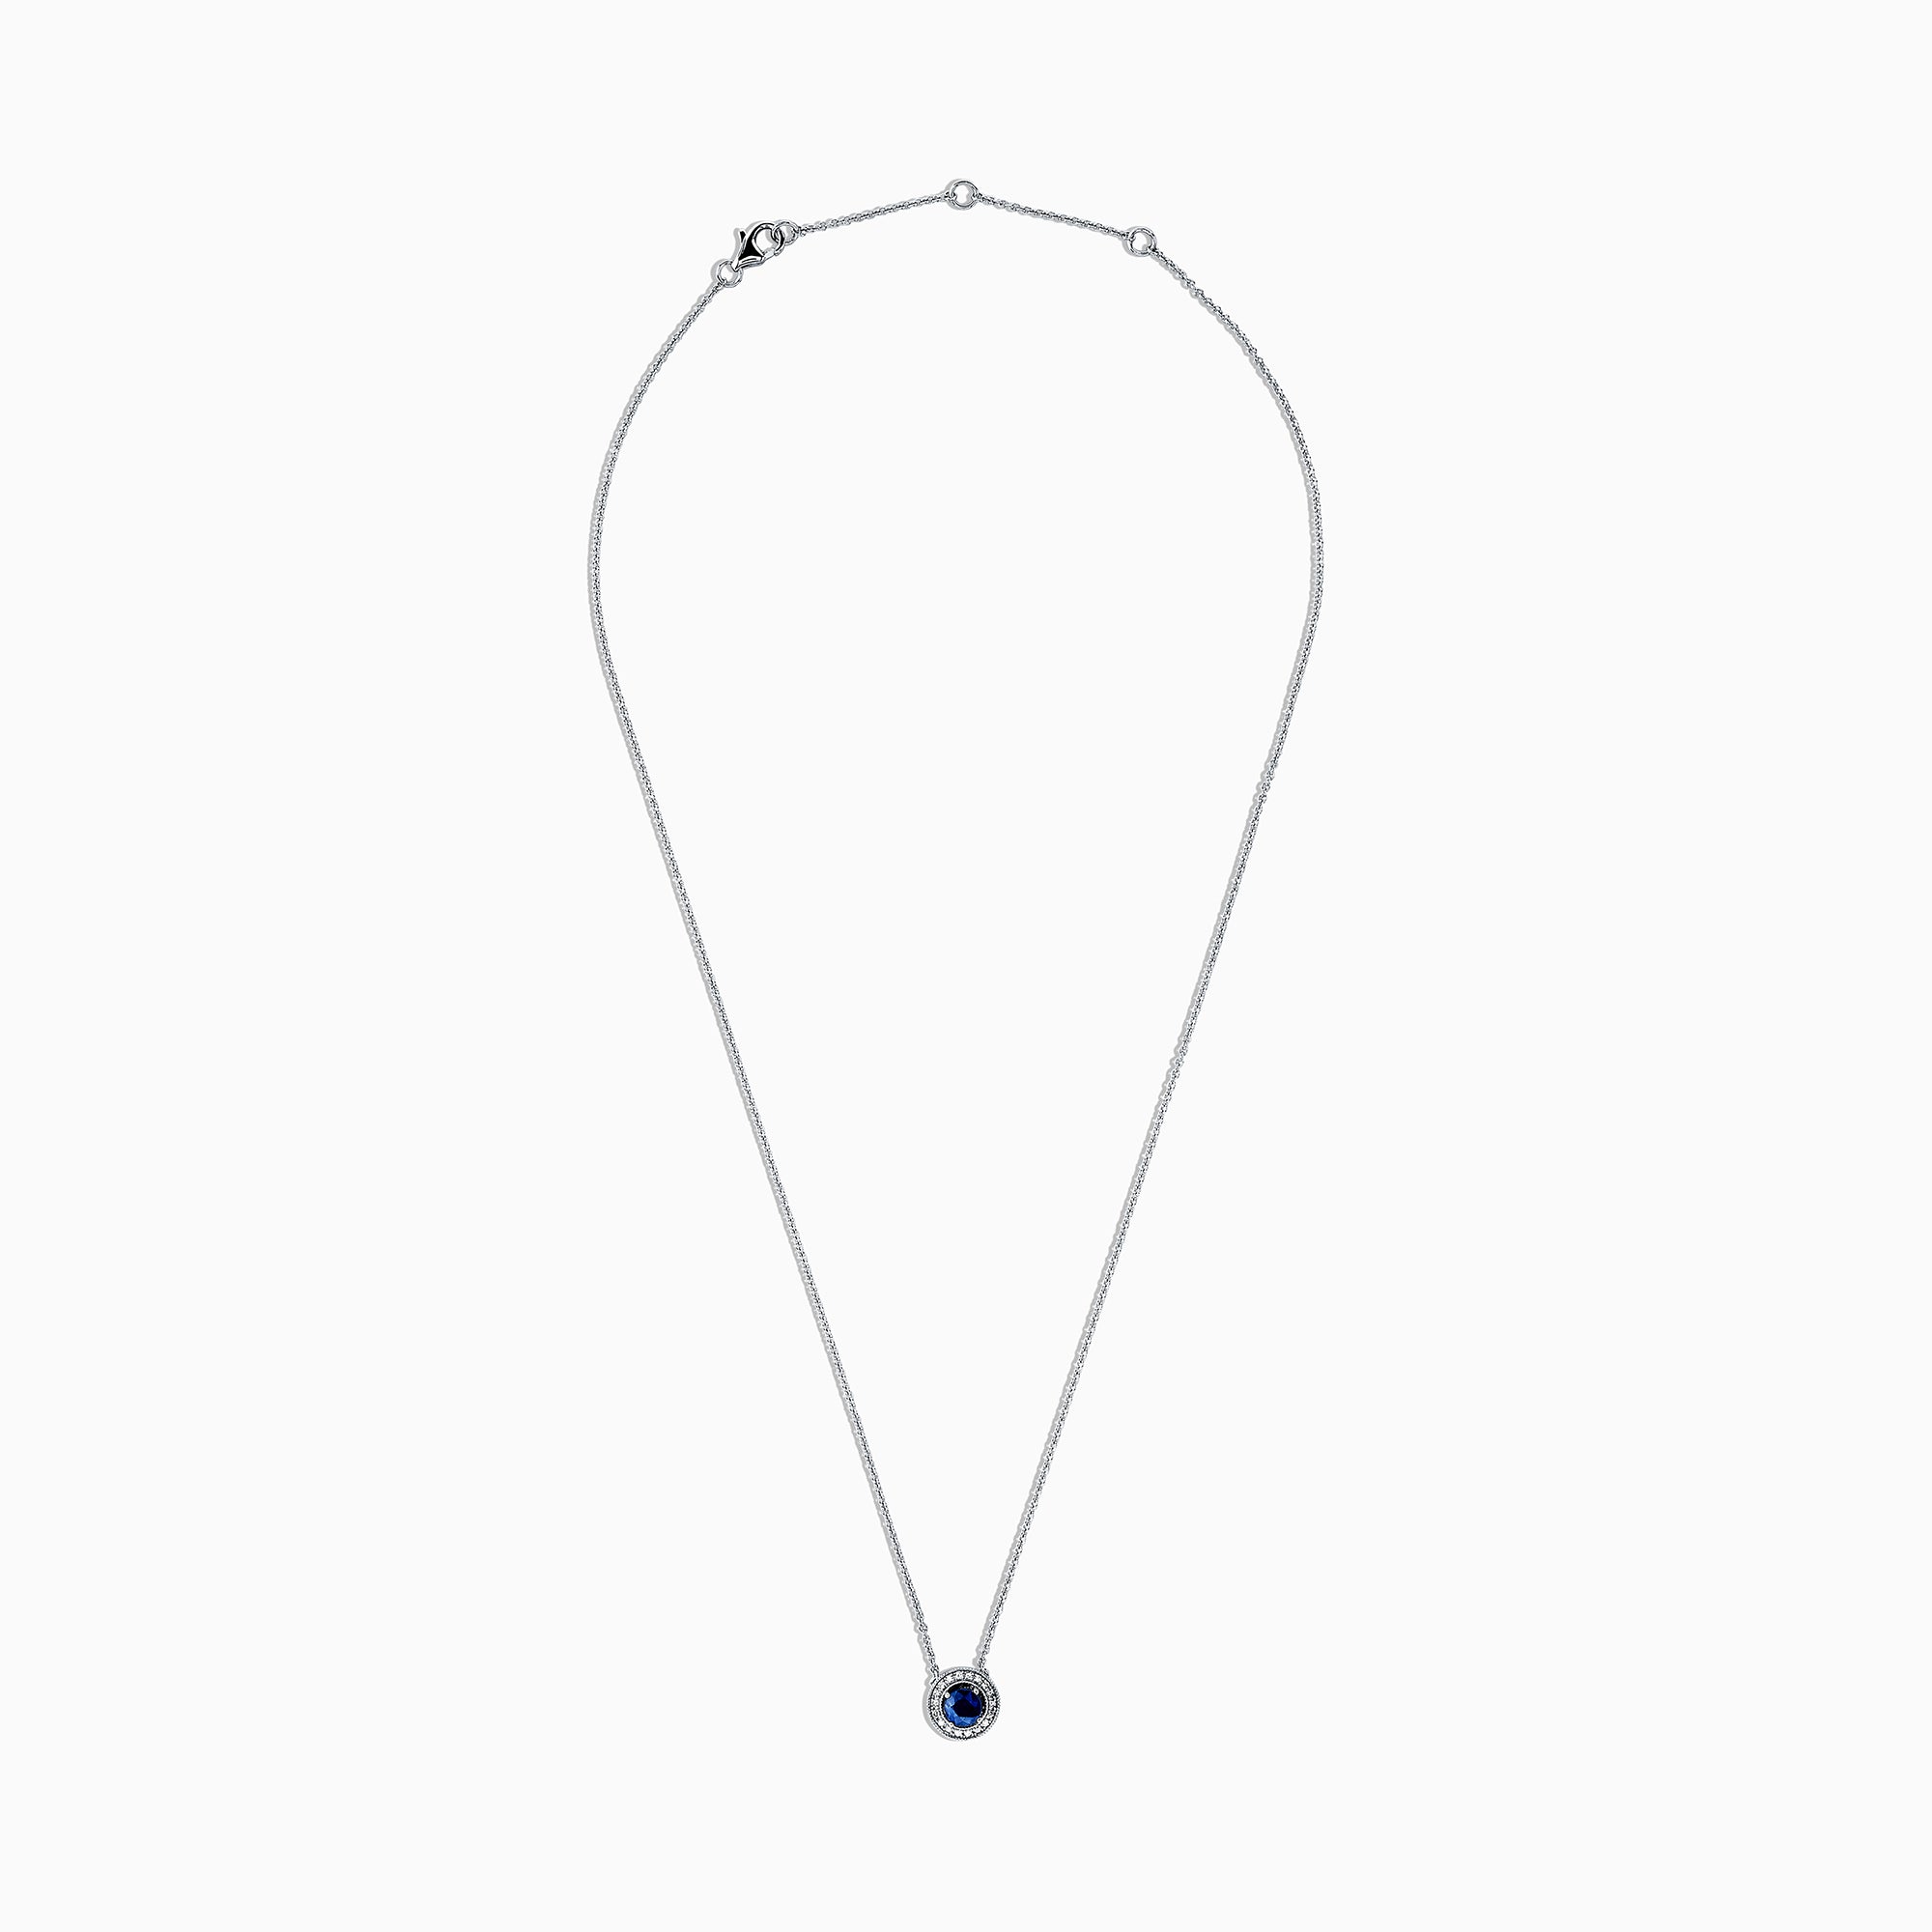 Effy 925 Sterling Silver Sapphire and Diamond Necklace, 0.66 TCW